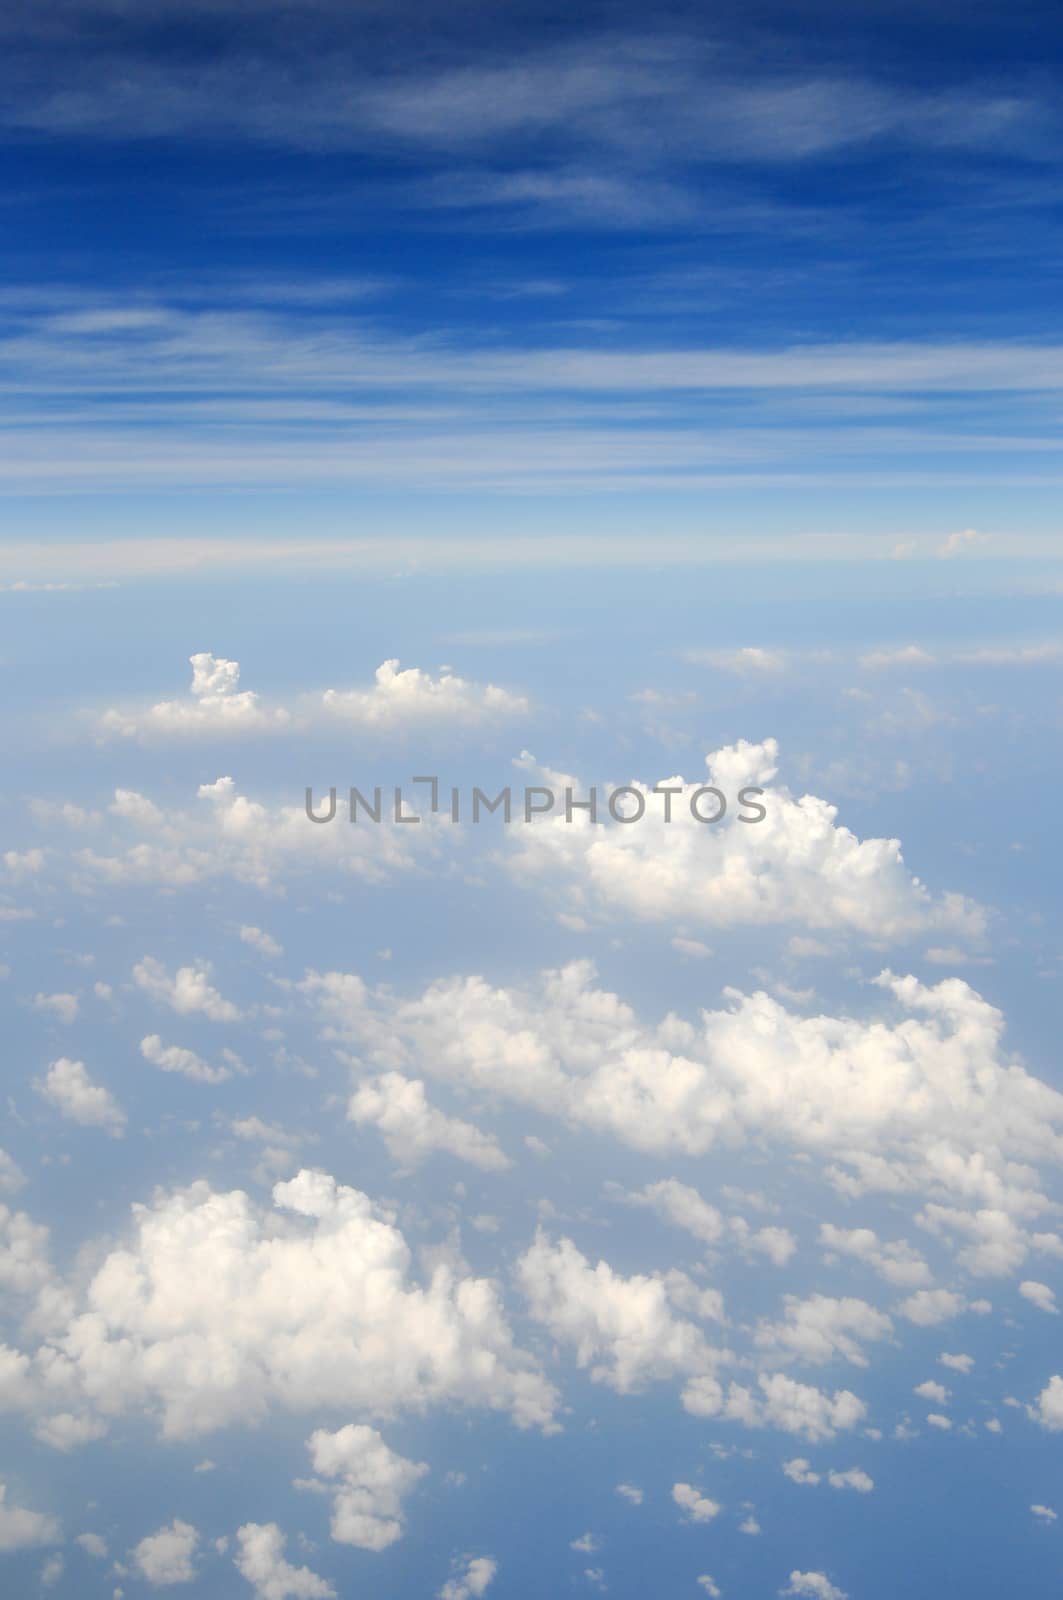 bright blue sky with clouds